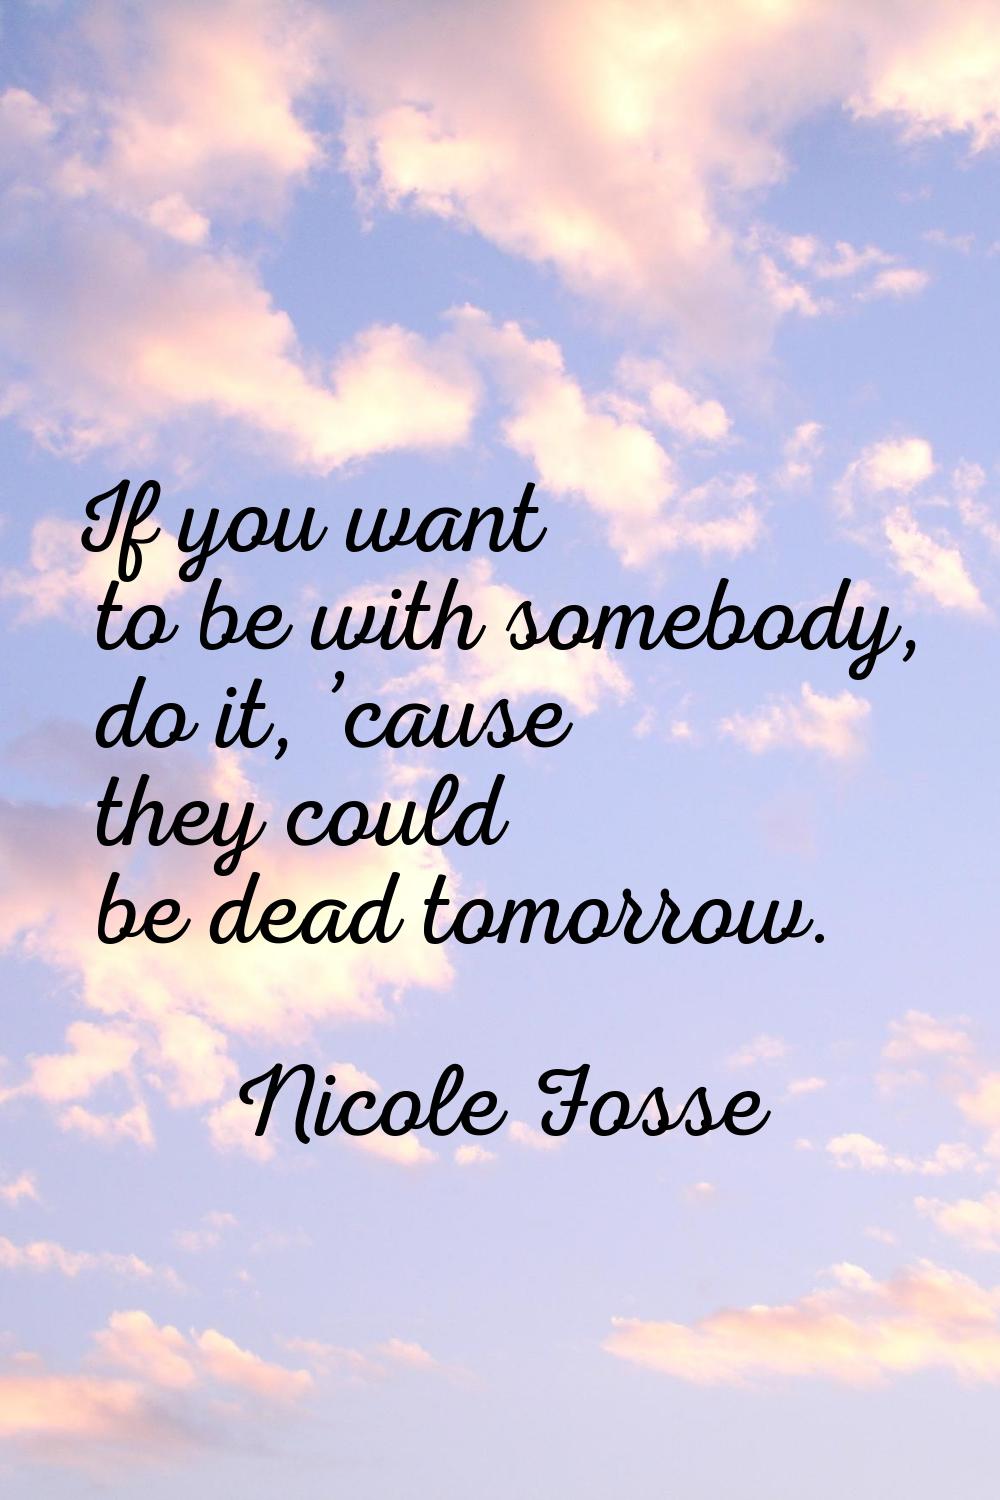 If you want to be with somebody, do it, ’cause they could be dead tomorrow.